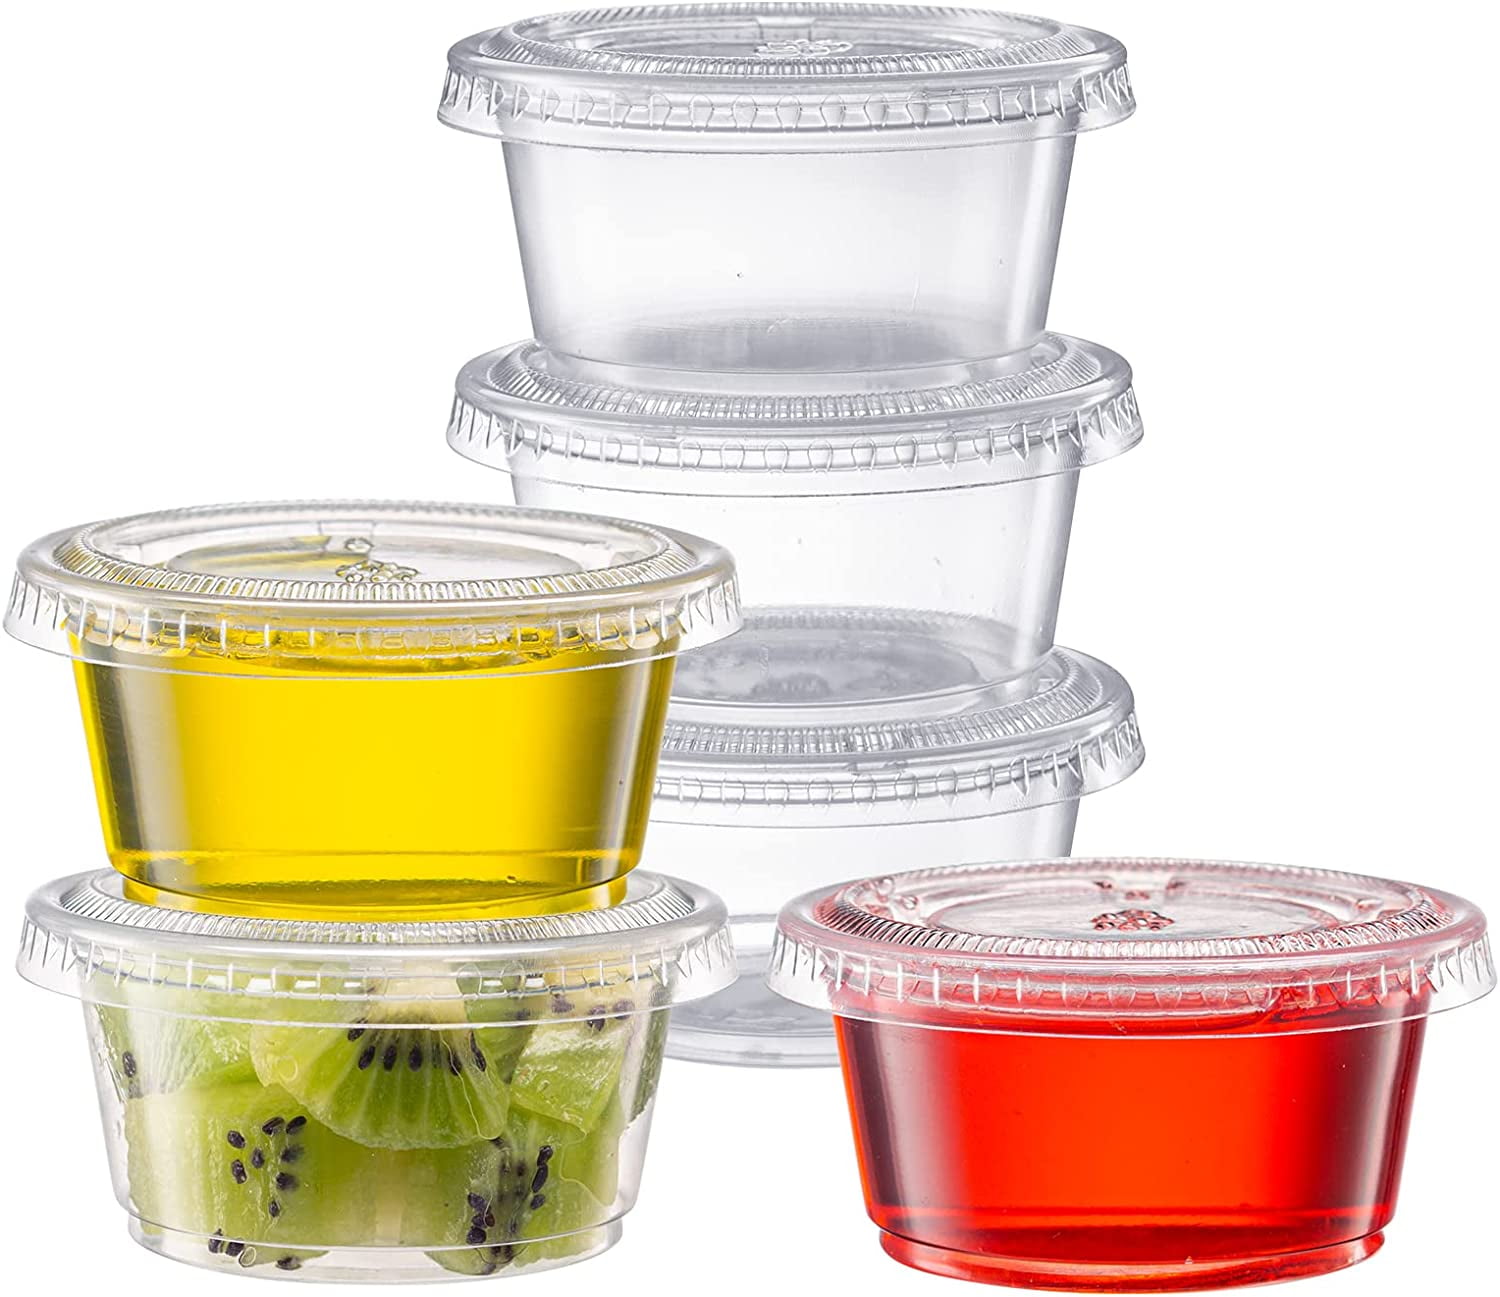 Condiment Cups container with Lids- 8 pk. 1 oz.Salad Dressing